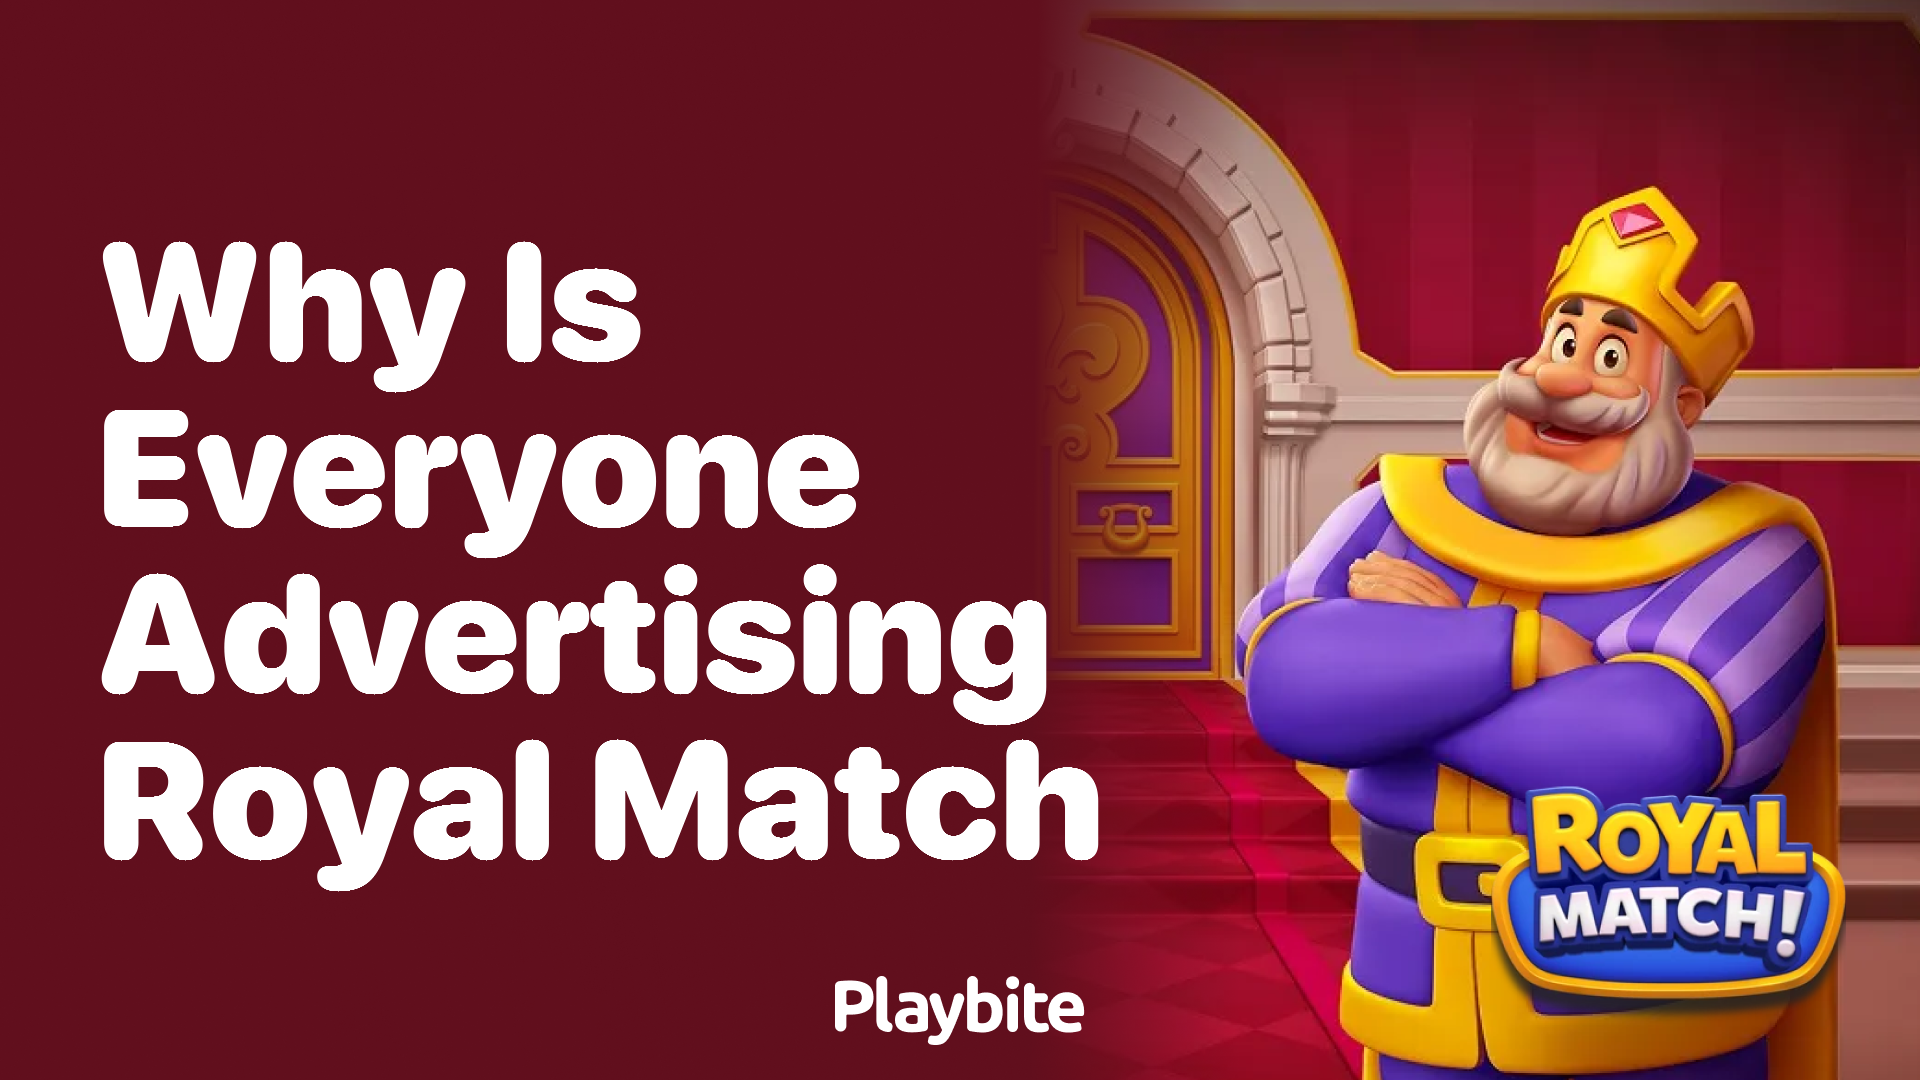 Why Is Everyone Advertising Royal Match?